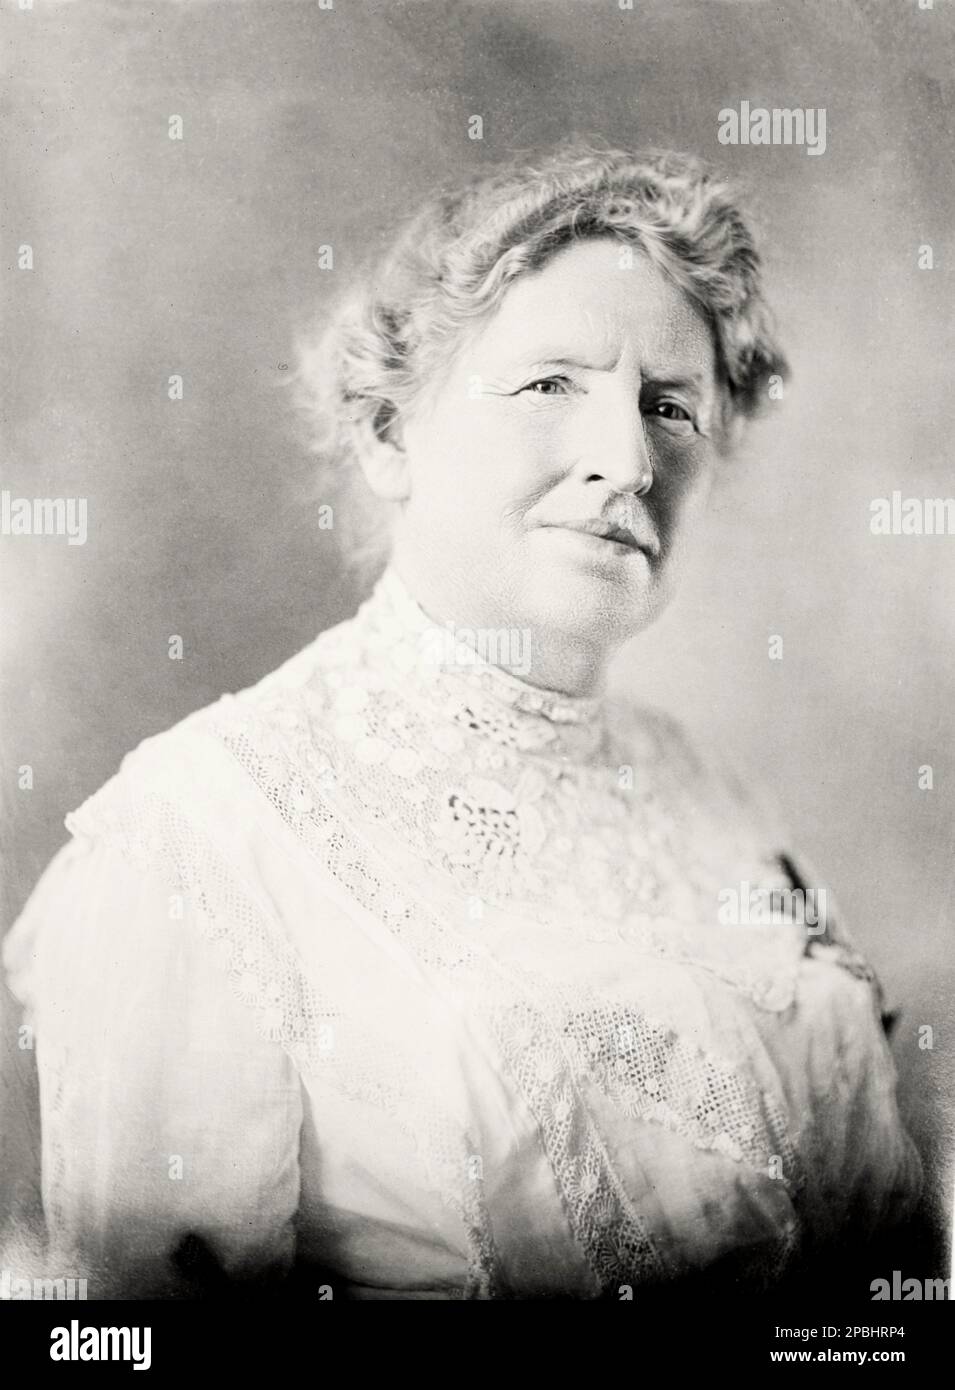 1920 , USA : Alice Mary Robertson ( 1854 – 1931 ) was an American educator, social worker, government official, and politician who became the second woman to serve in the United States Congress, and the first from the state of Oklahoma.  - foto storiche - foto storica   - portrait - ritratto  - PEDAGOGIA  - PEDAGOGO - Pedagoga - EDUCATORE - EDUCAZIONE - EDUCATRICE - donna anziana vecchia - old ancient woman - POLITICA - POLITICIAN - POLITIC - POLITICO DONNA  - pizzo - lace  ----  Archivio GBB Stock Photo